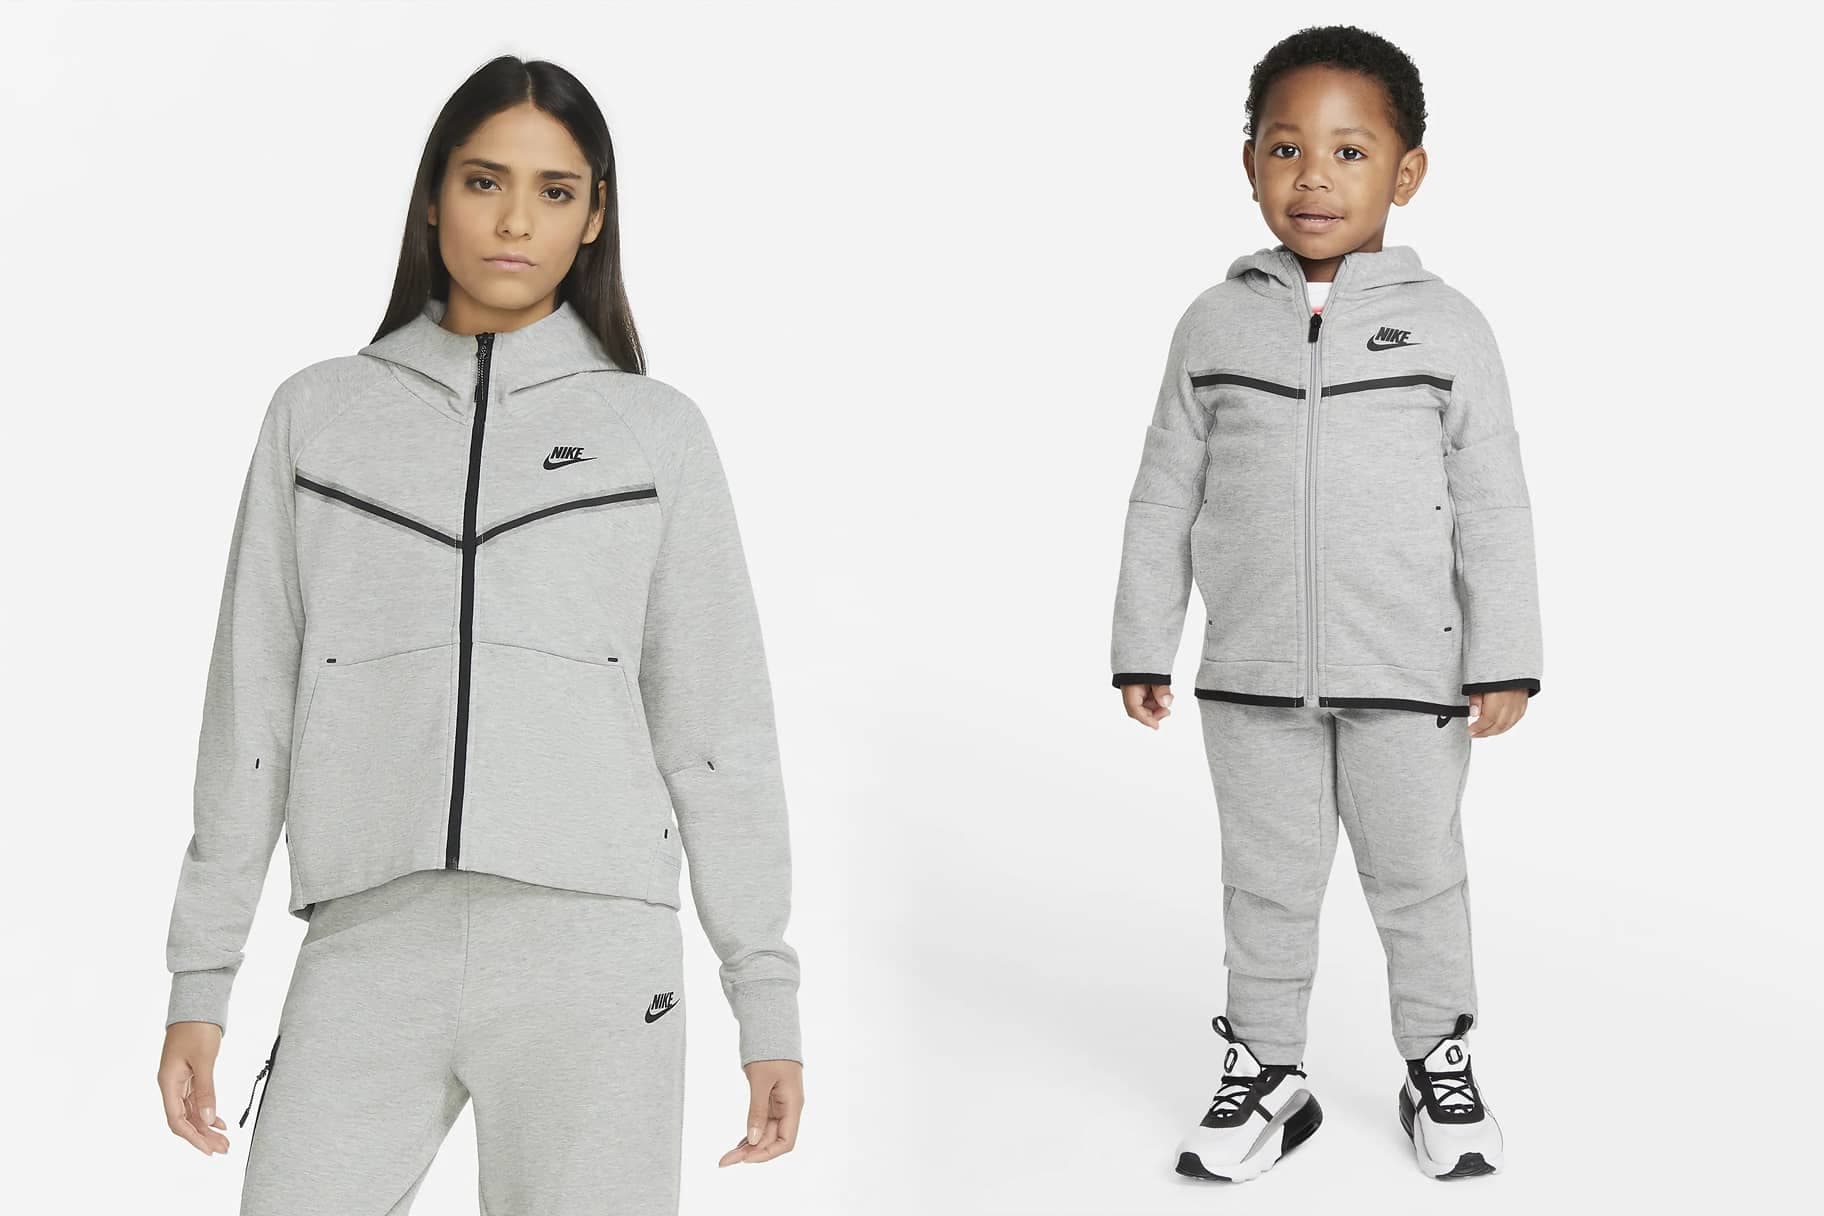 Shop Matching Nike Outfits For The Whole Family. Nike.Com